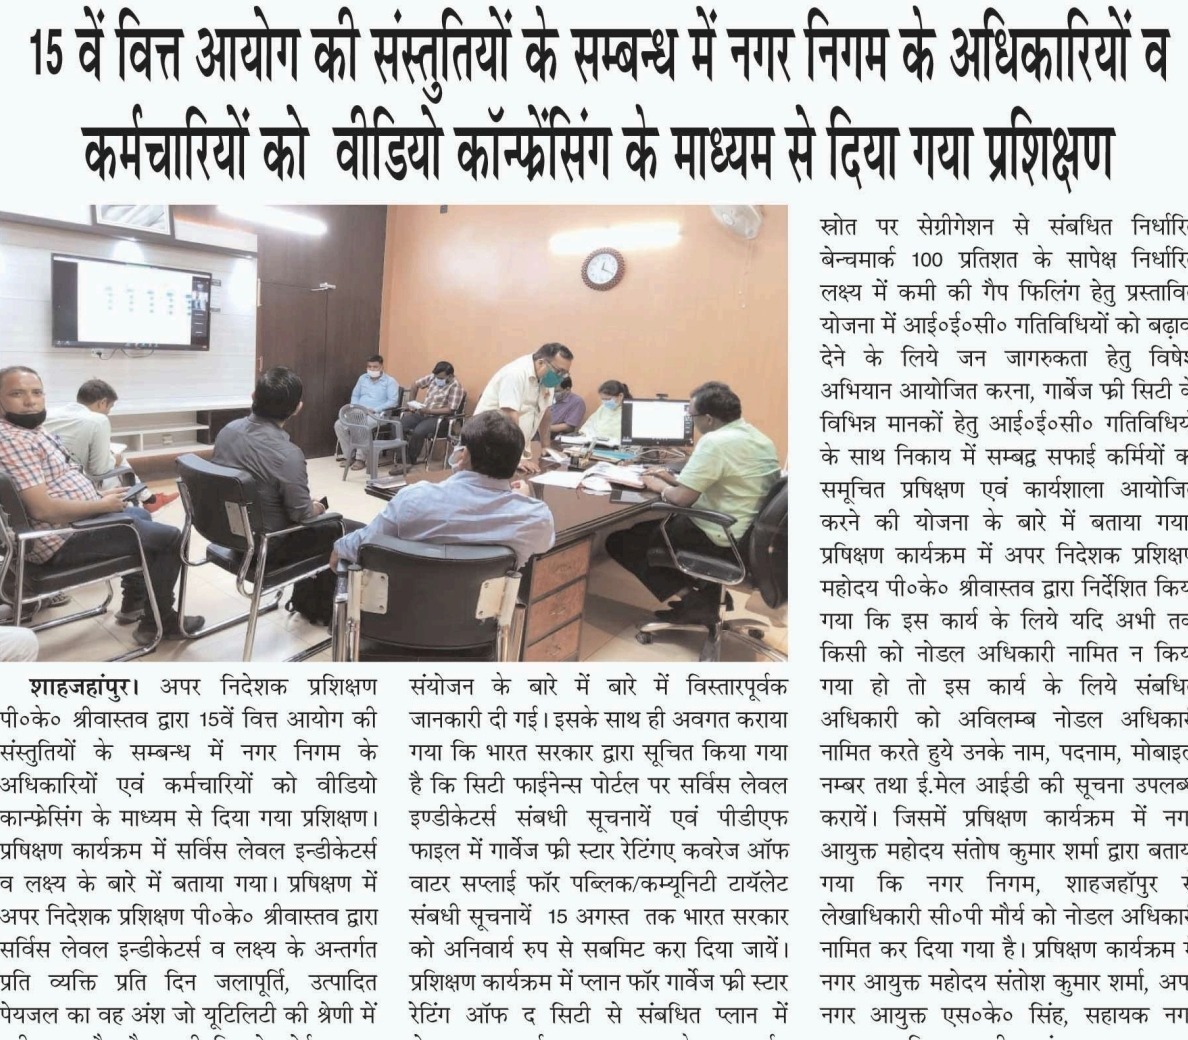 Training imparted to officers and employees of Nagar Nigam regarding Recommendations of the Finance Commission.